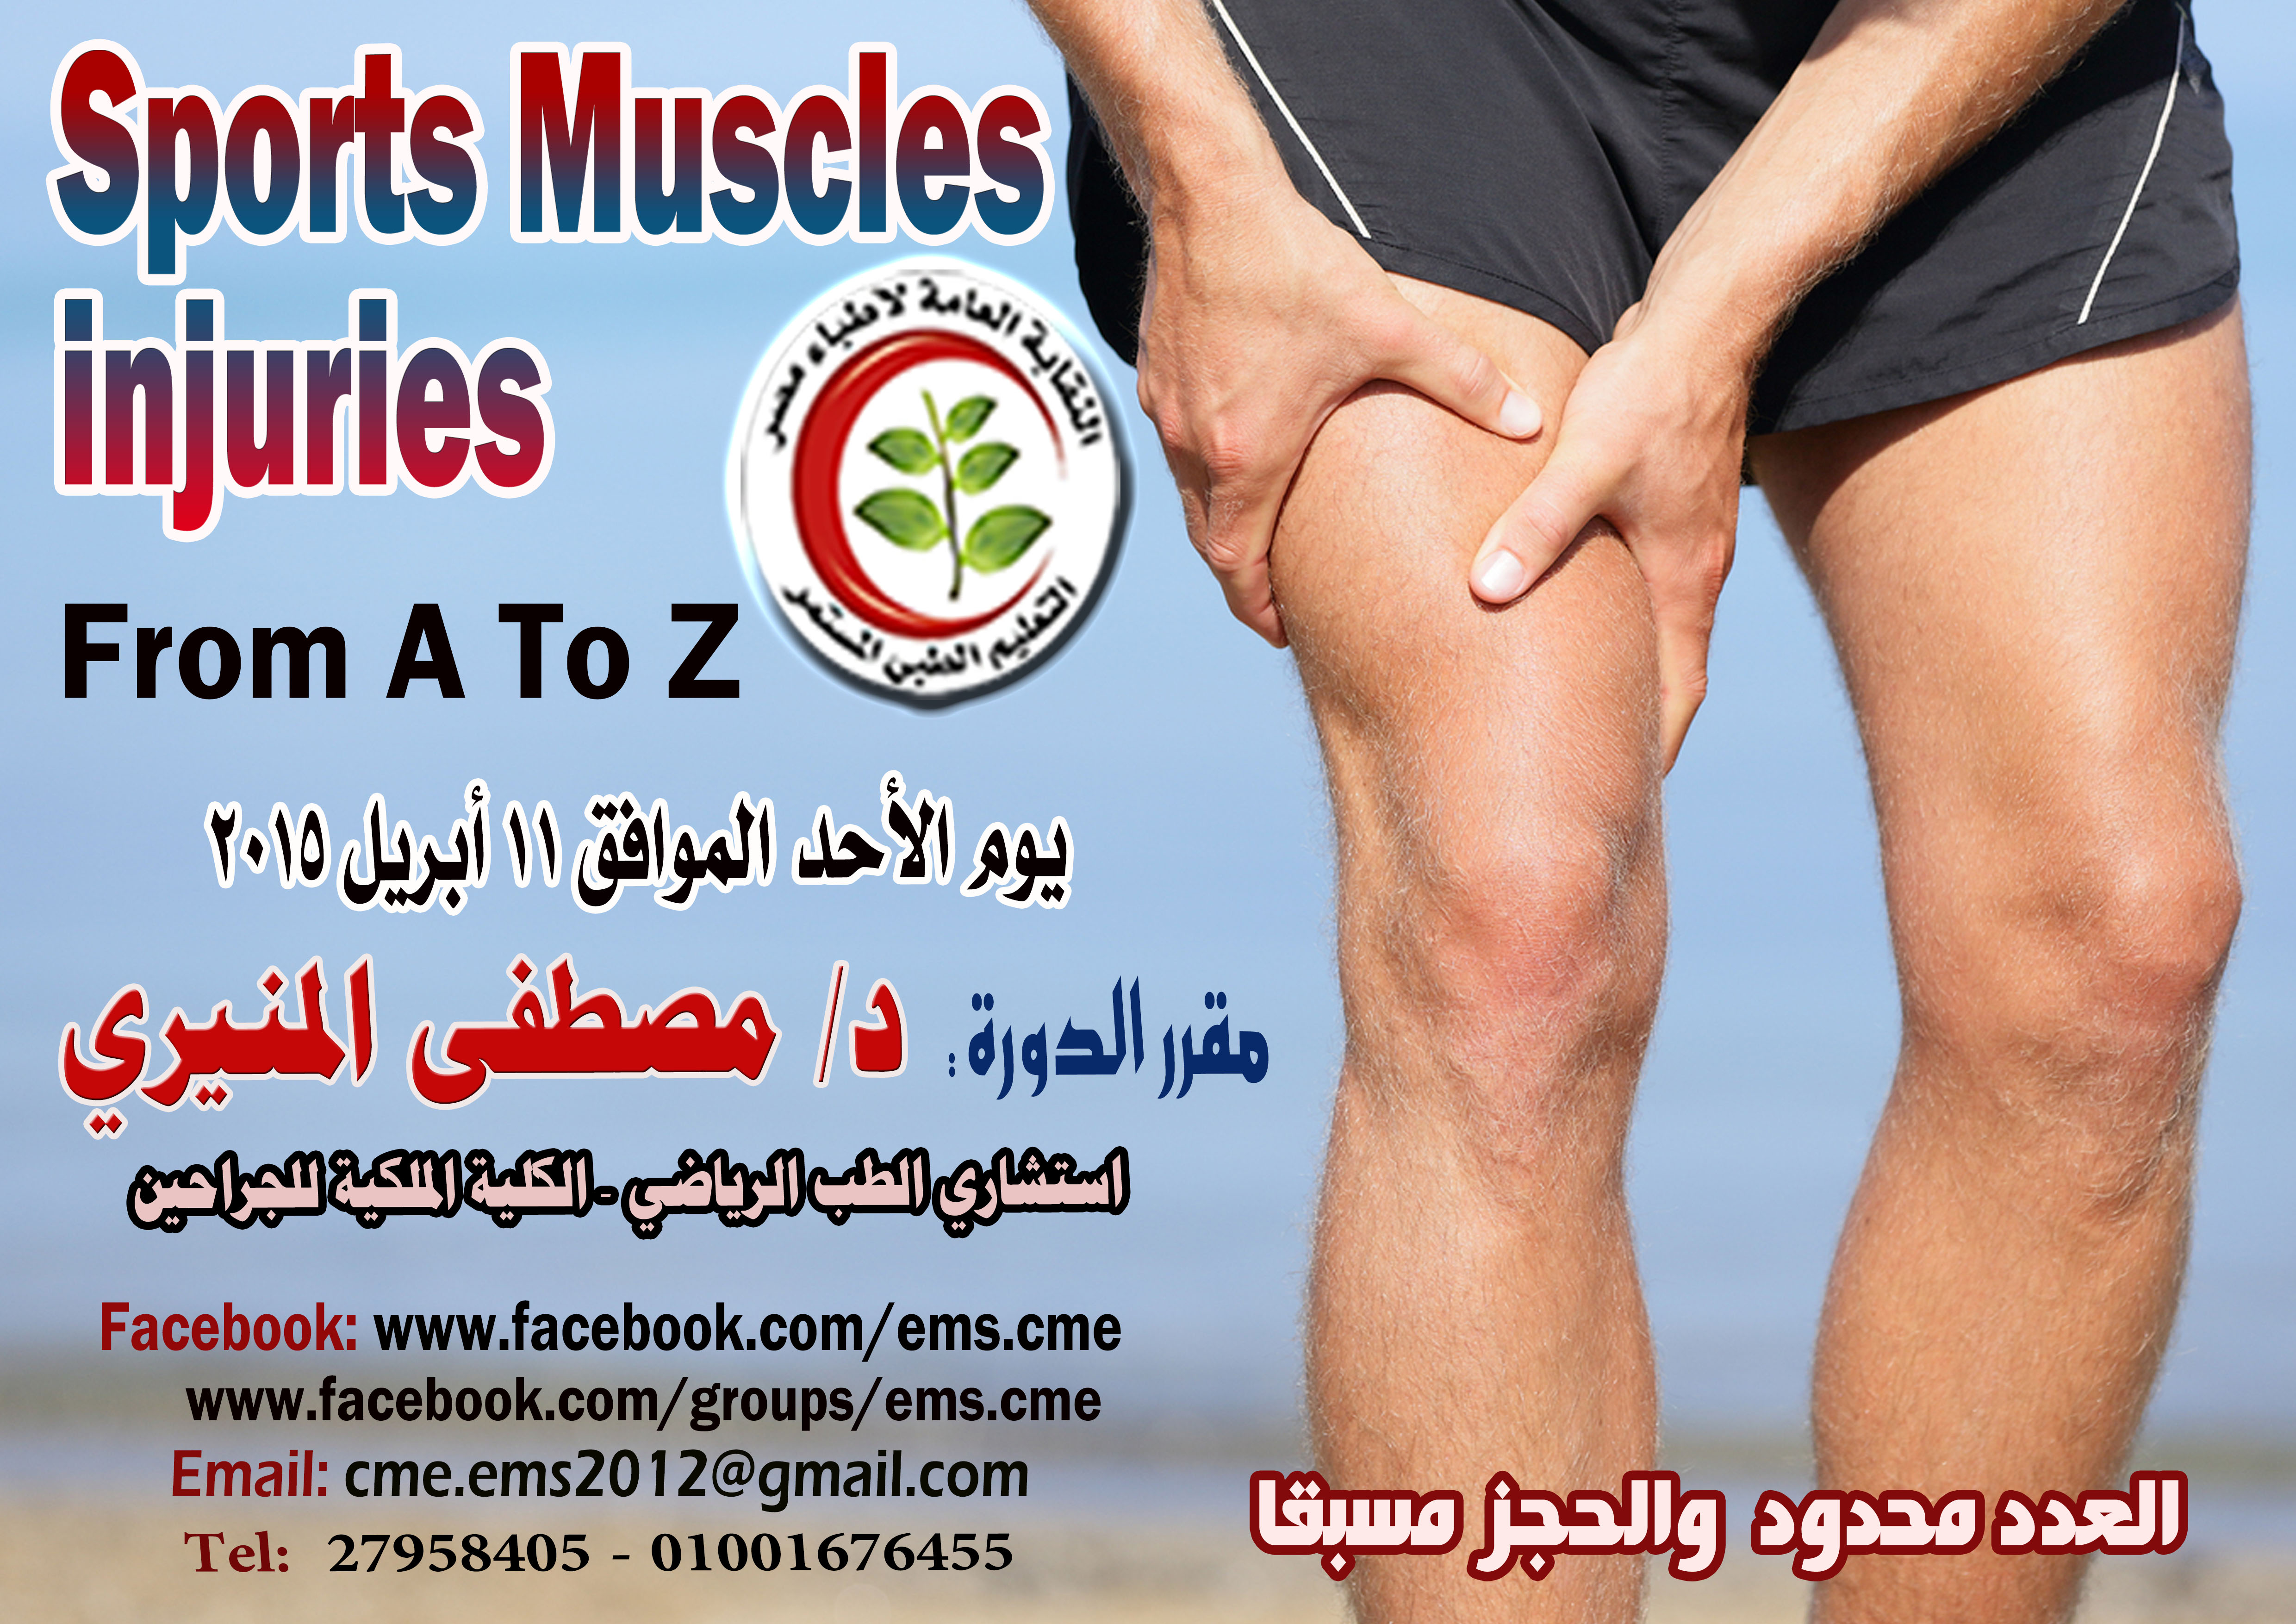 Sports Muscles injuries From A To Z